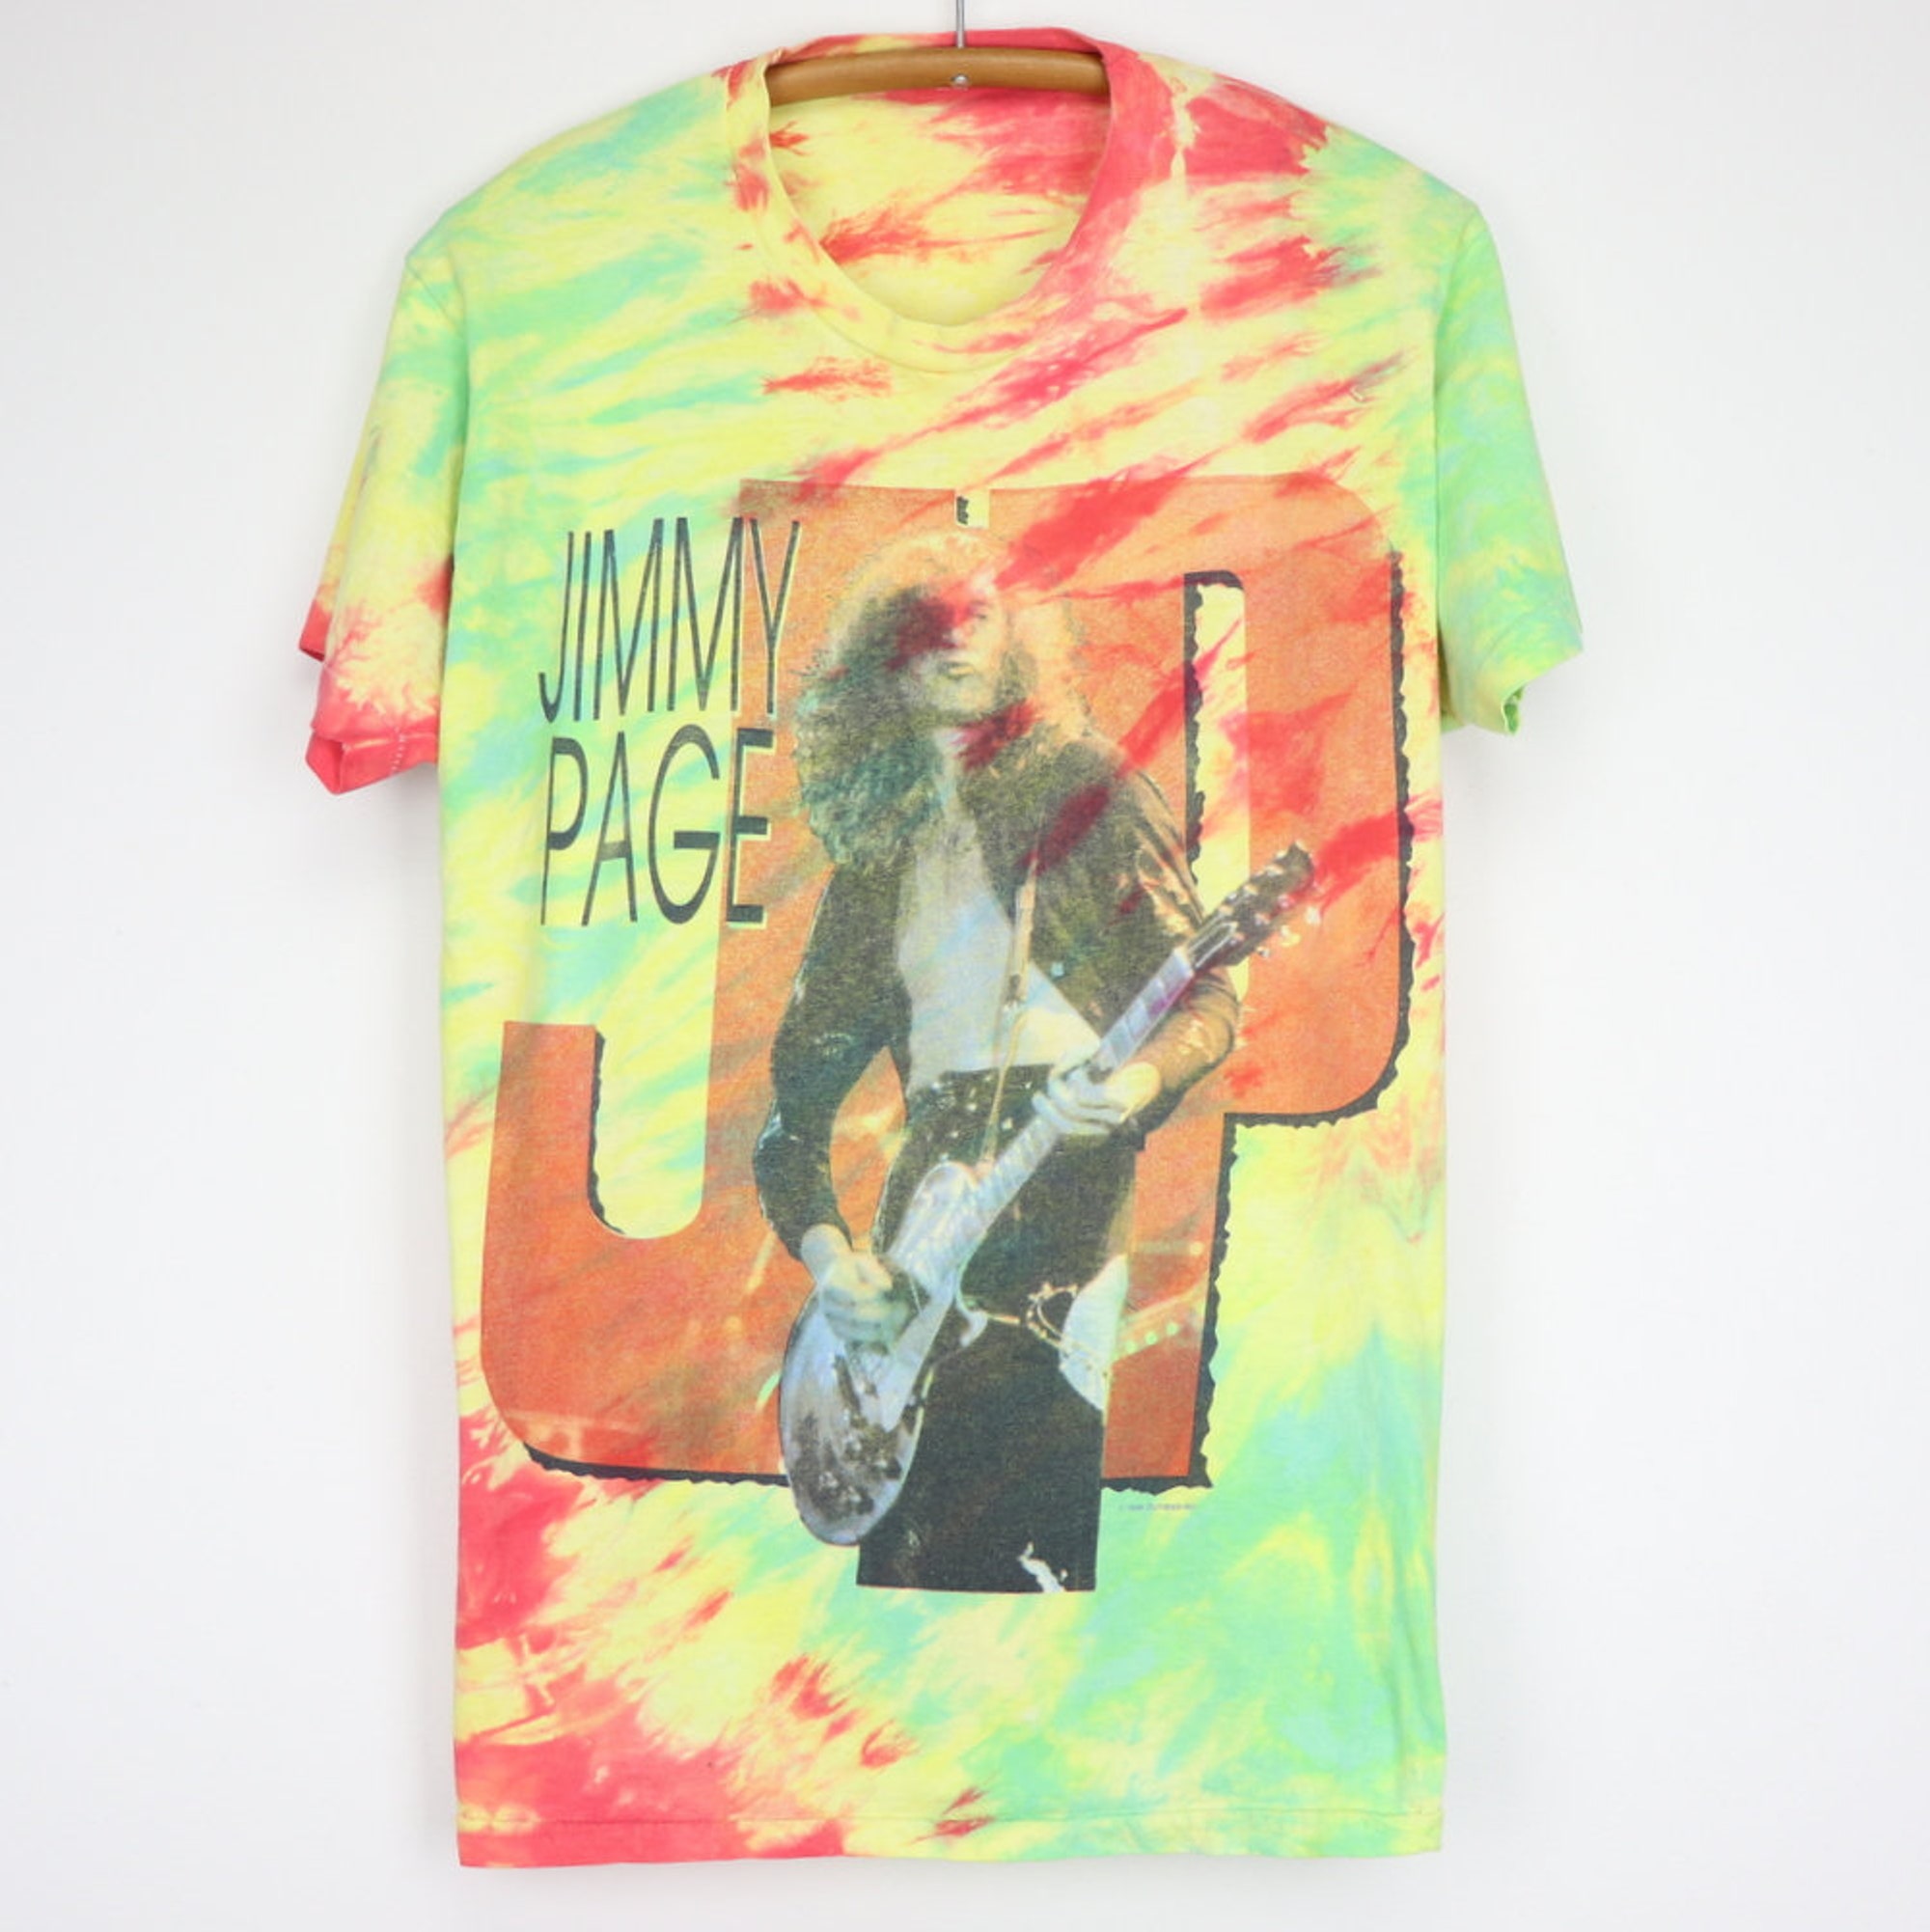 Discover vintage 1988 Jimmy Page Shirt